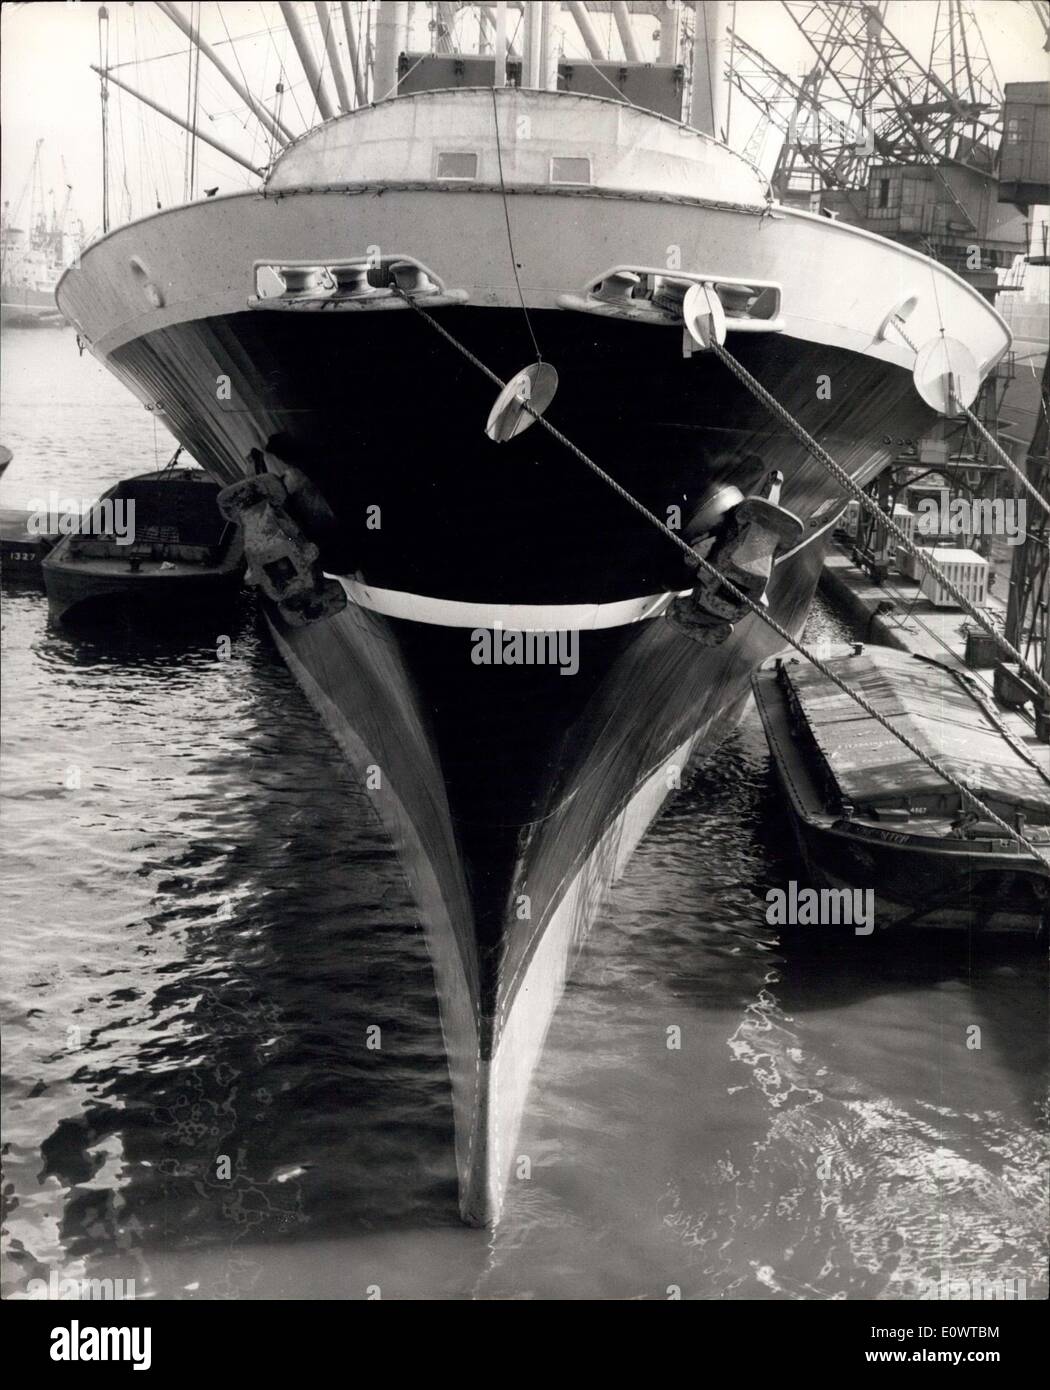 Feb. 27, 1964 - 27.2.64 The Ship with the controversial bottom. A recent arrival at the London docks is the new Japanese cargo ship the Yamshiro Maru which has completed her maiden voyage from Kobe. The ship, which was built by Mitsubishi of Nagasaki, has a broad beam, a bulbous bow, and a slender stem and stern. The builders claim that these characteristics which have been developed after years of research, give her more knots on less fuel than a convention ships's hull Stock Photo